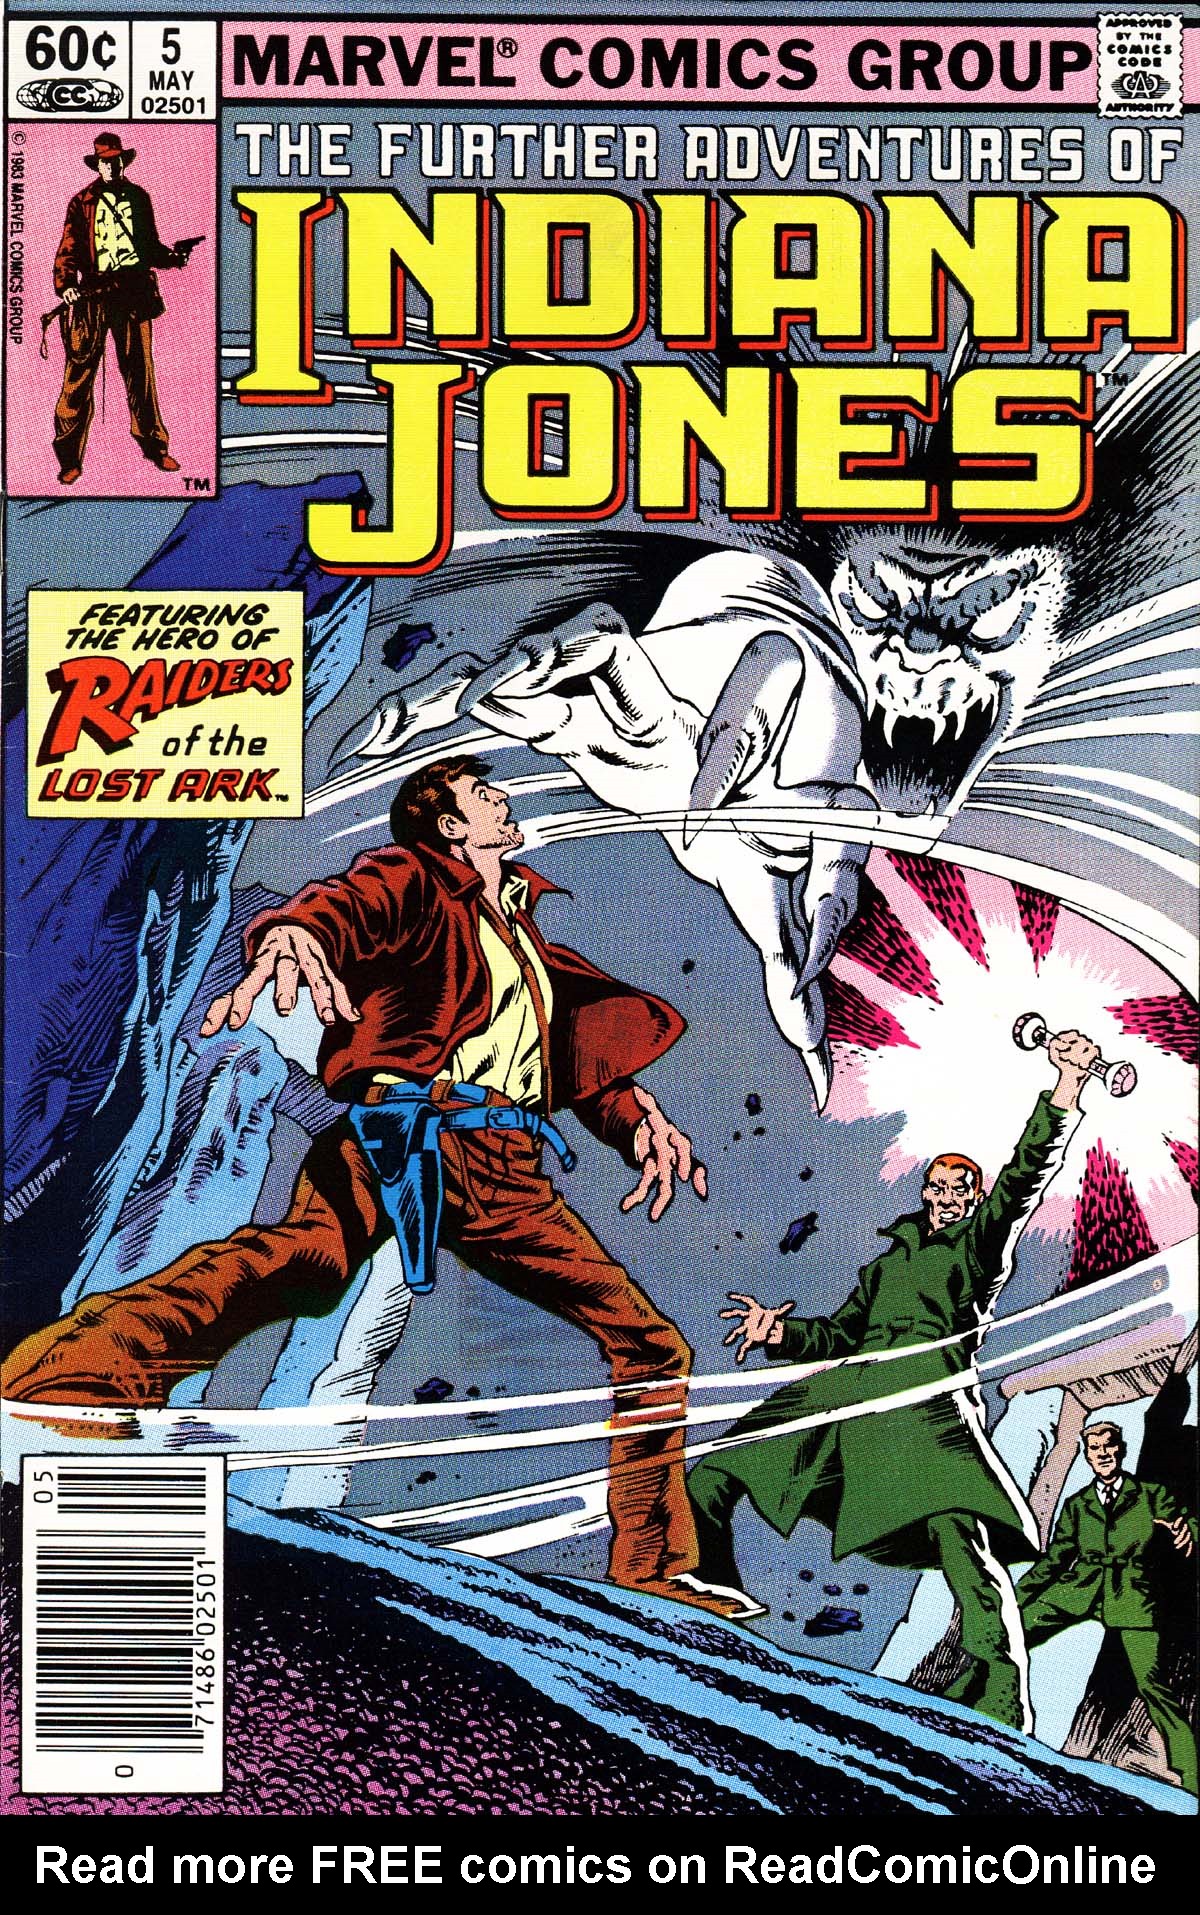 Read online The Further Adventures of Indiana Jones comic -  Issue #5 - 1